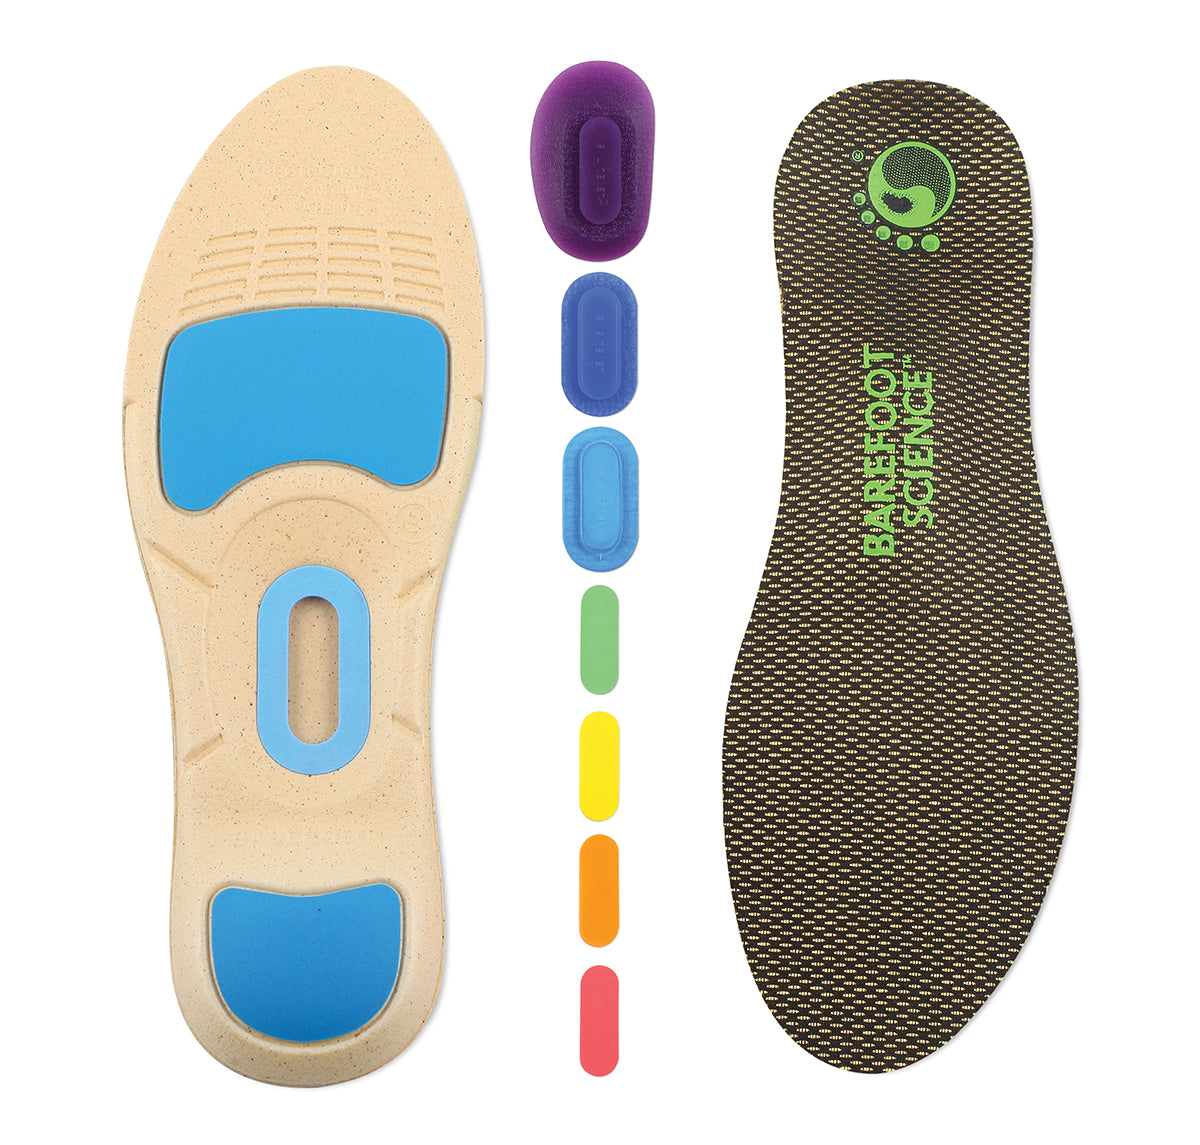 https://barefootscience.us/cdn/shop/products/BarefootScience_full_07_Inserts_sm_0f0955d5-7799-45e7-ab96-ebe421fe13d6_1200x.jpg?v=1583935165